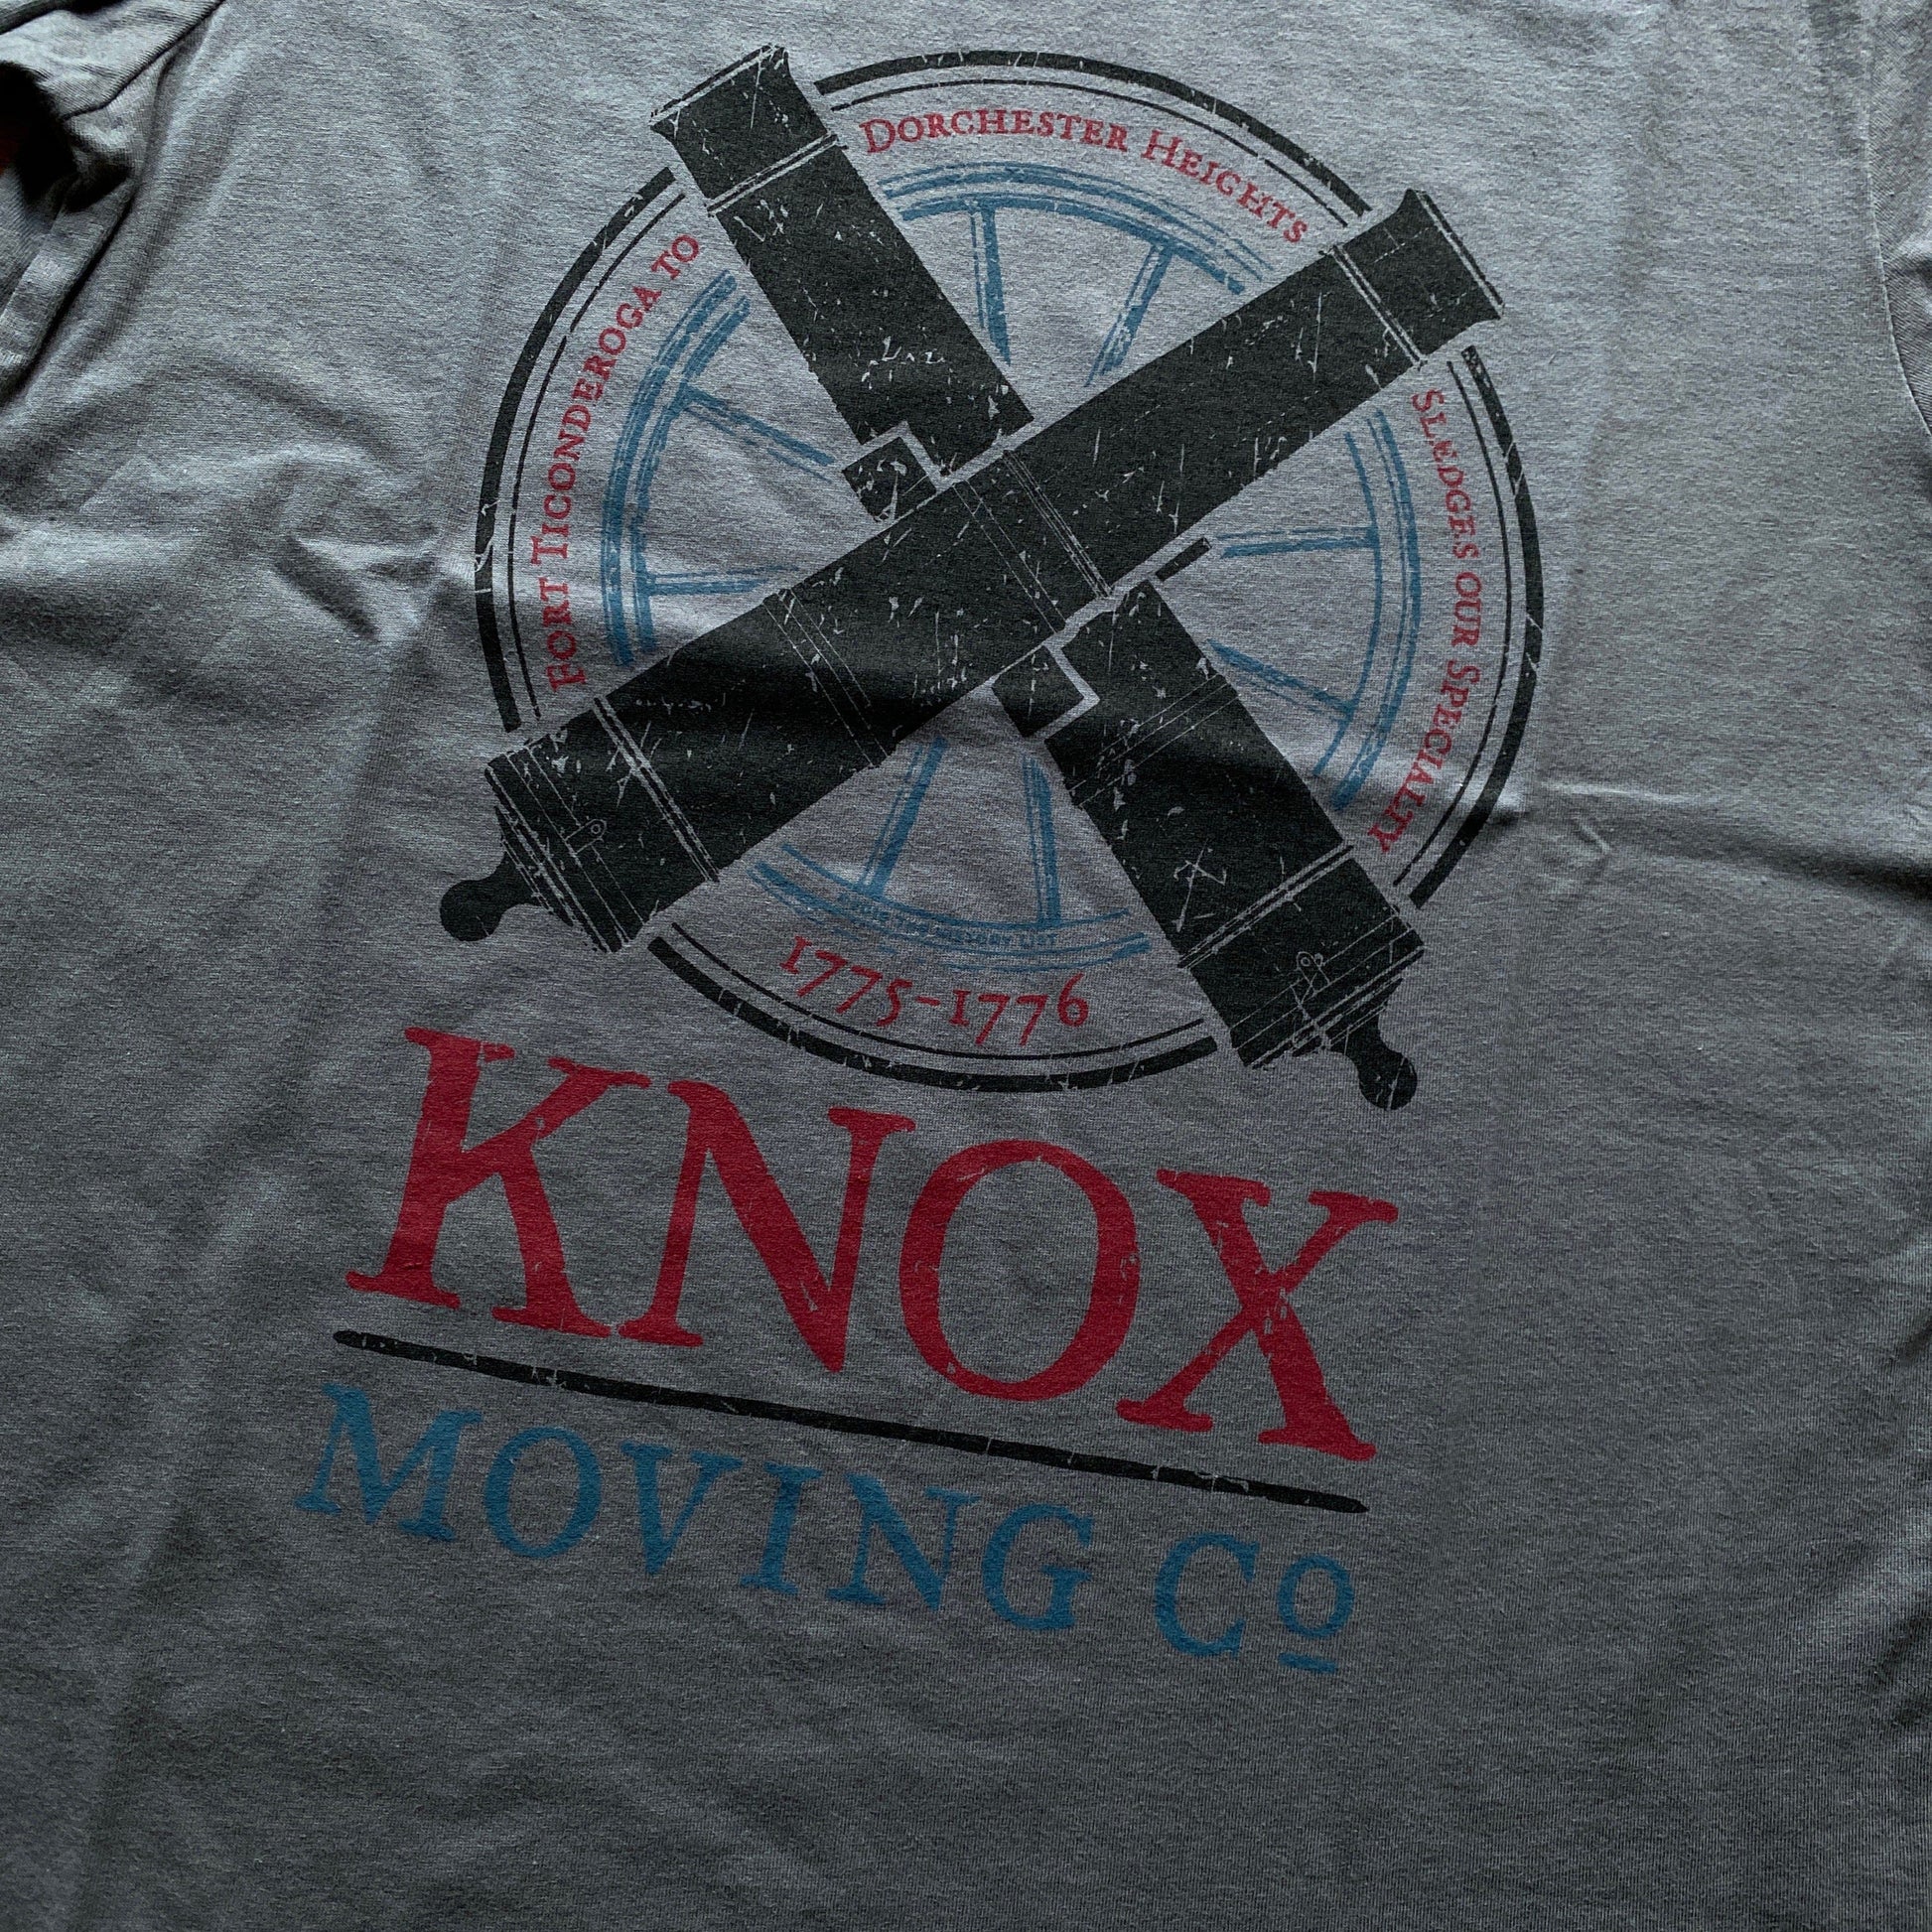 Close-up of "Knox Moving Co." Shirt from the history list store